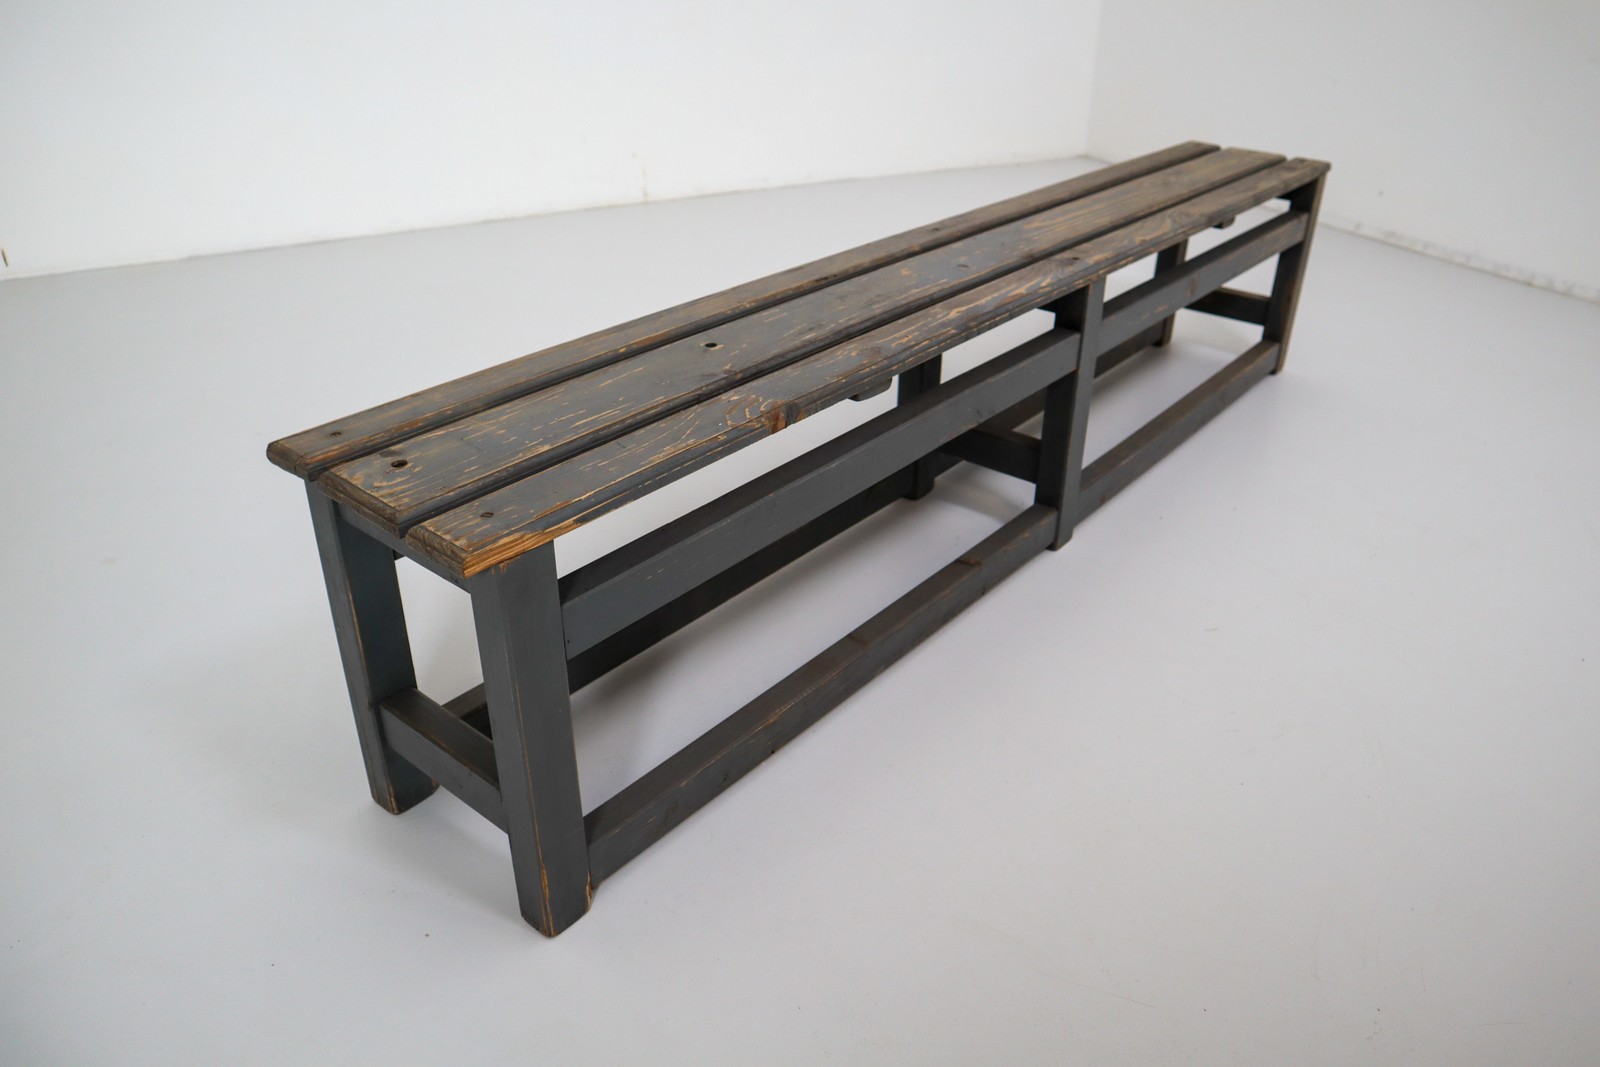 Rustic Wooden Industrial Bench Sofas, Decorative Wooden Benches